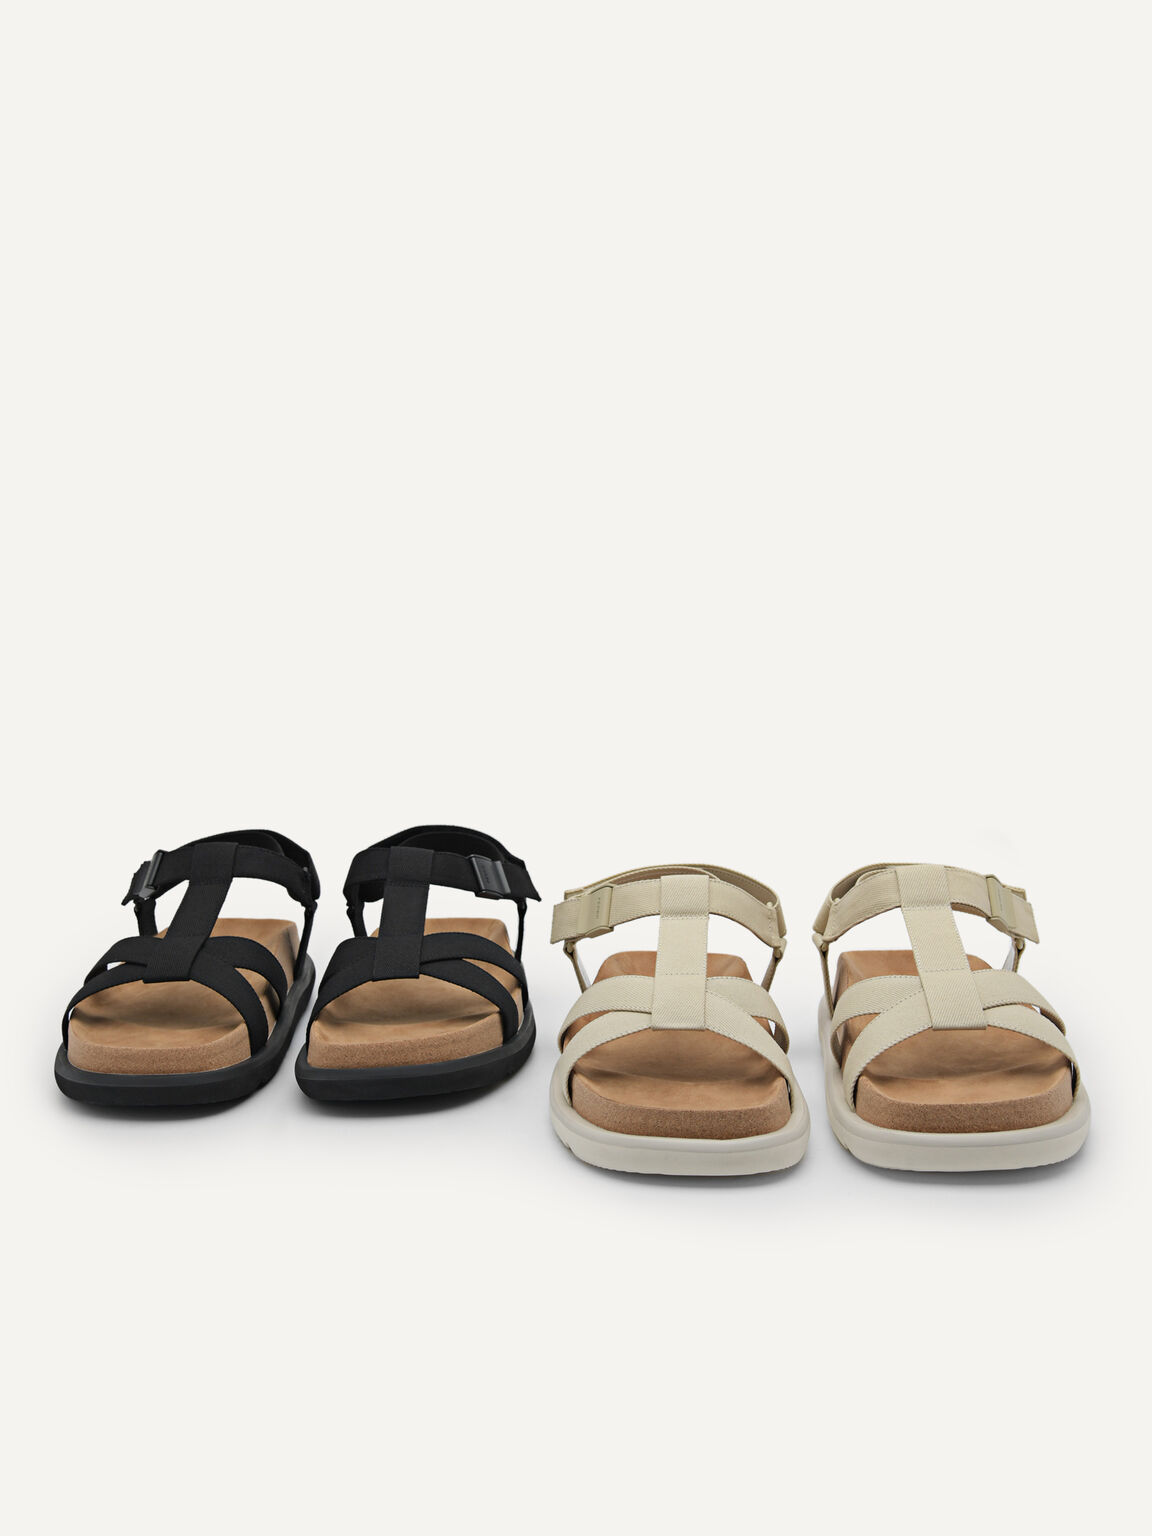 rePEDRO Canvas Band Sandals, Beige